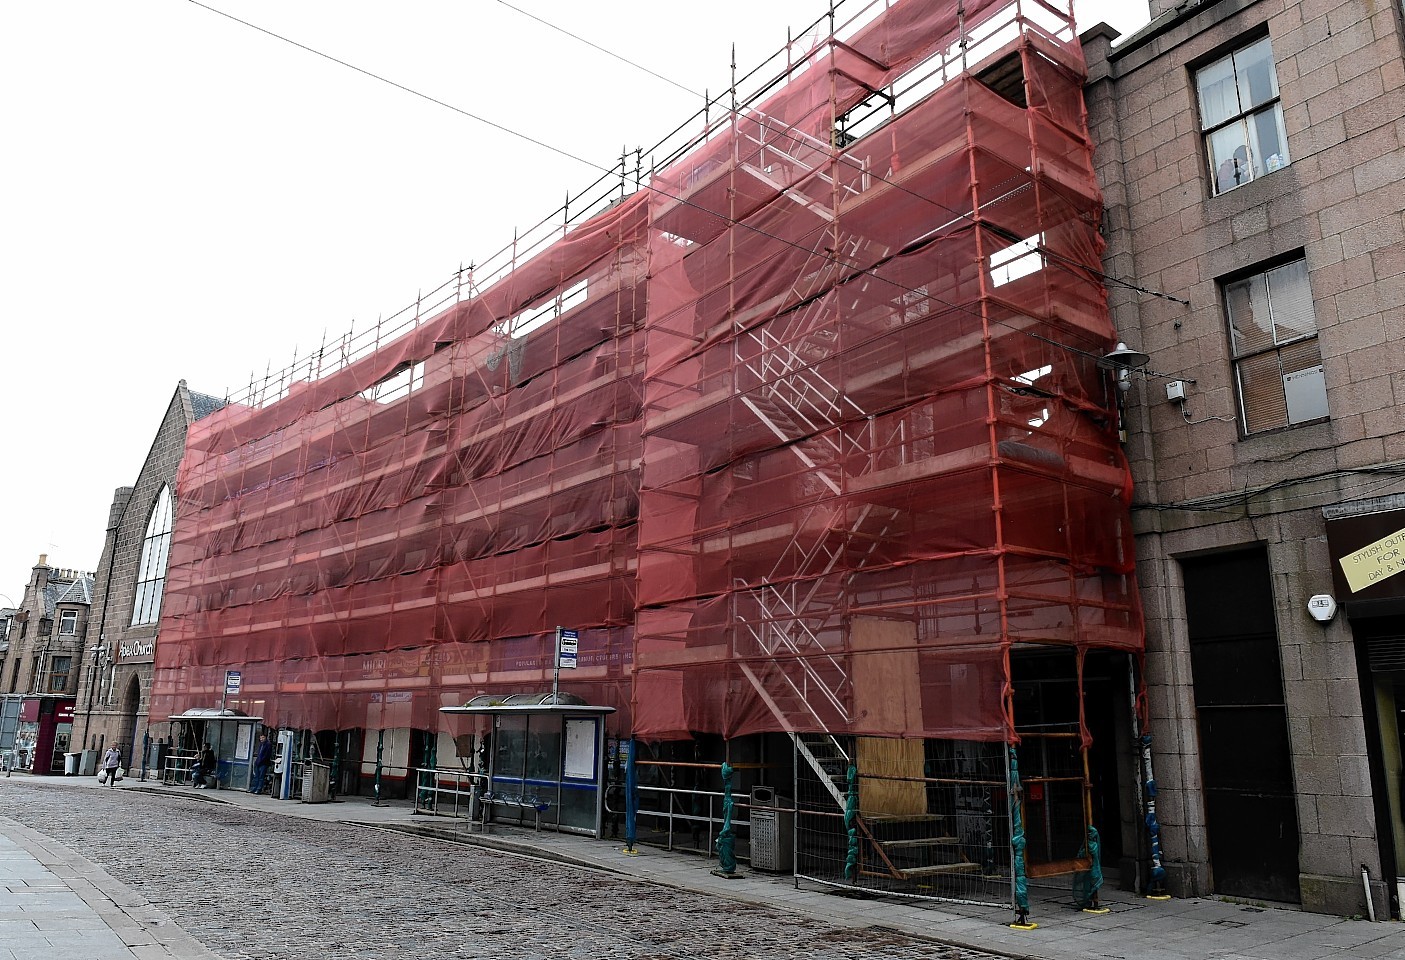 Travelodge is replacing the formerly derelict site in Peterhead's Chapel Street.